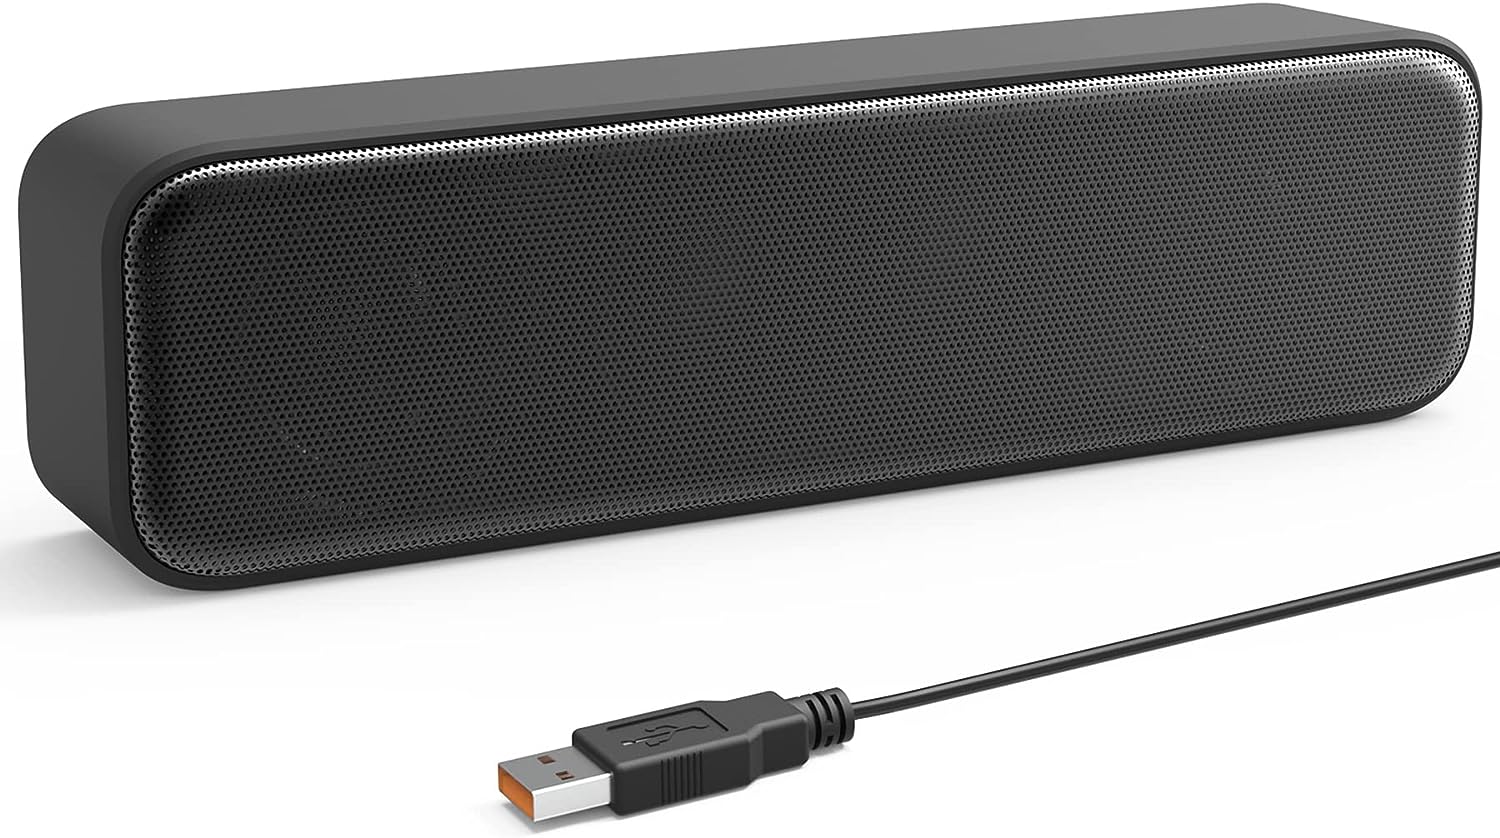 [Exclusive Promo] Get Upgraded USB Computer/Laptop Speaker with Stereo Sound at 49% off!